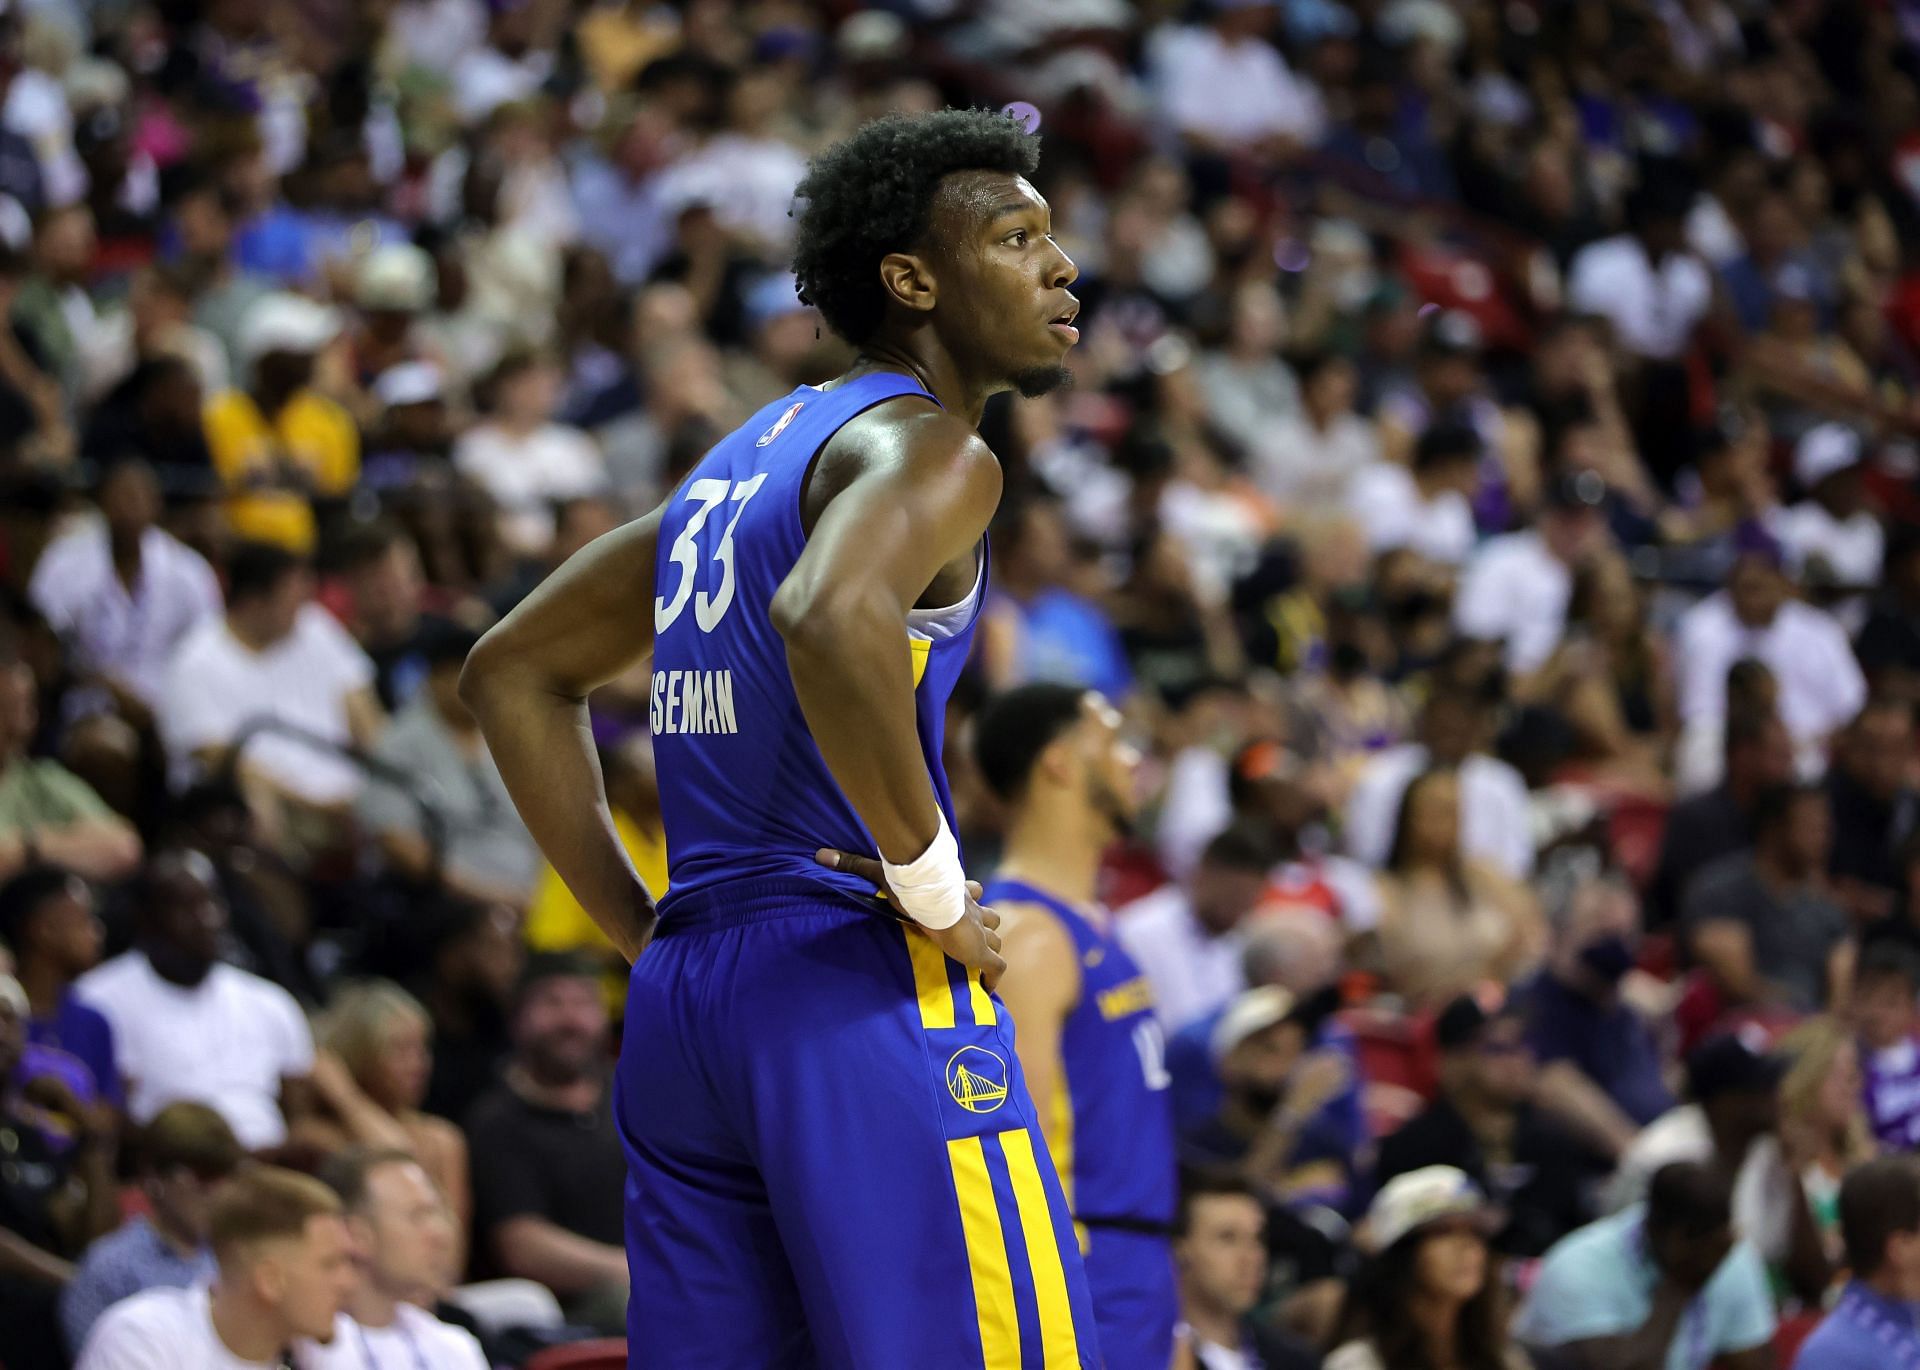 James Wiseman of the Golden State Warriors during the 2022 NBA Summer League